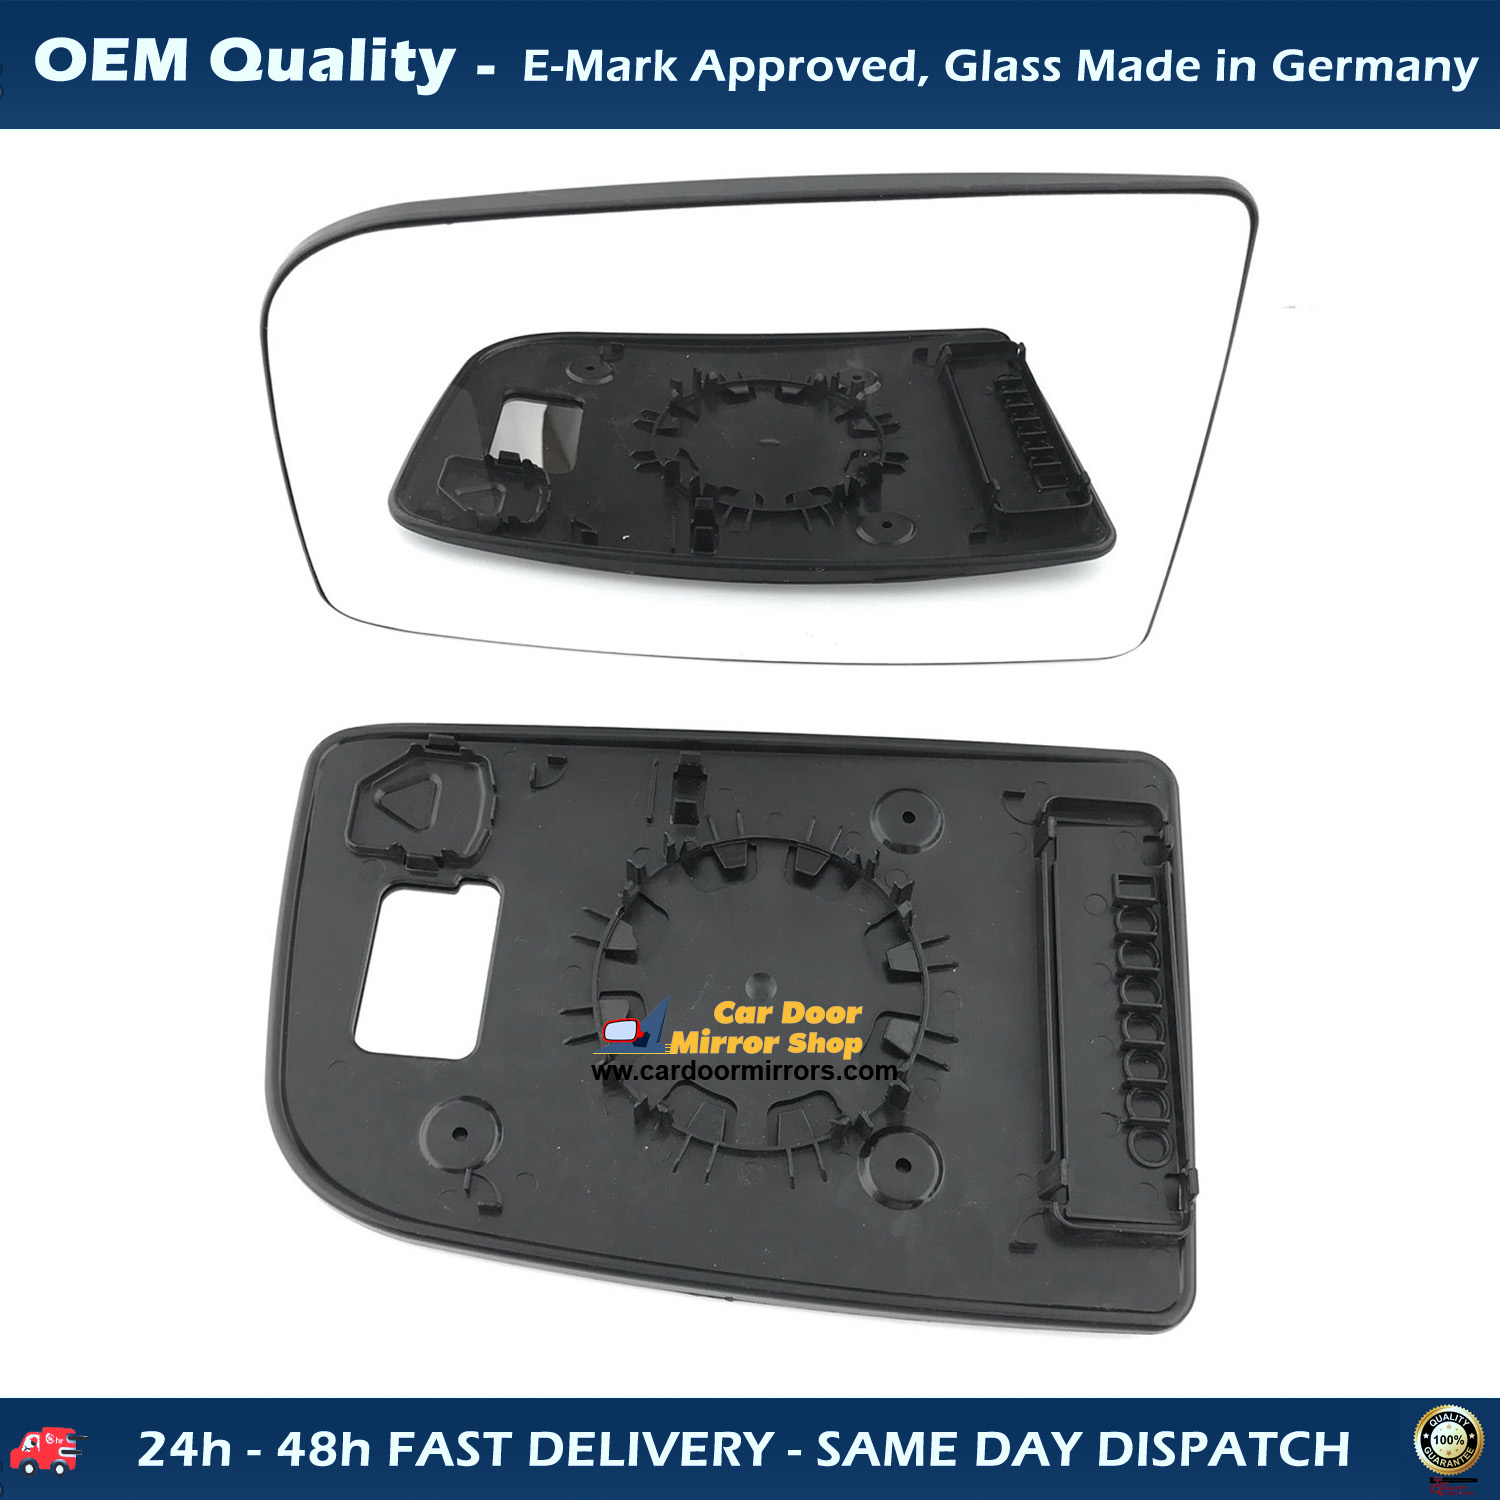 Mercedes Sprinter CHASSIS CAB Wing Mirror Glass With Base LEFT HAND ( UK Passenger Side ) 2012 to 2017 – Non-Heated Base Convex Mirror